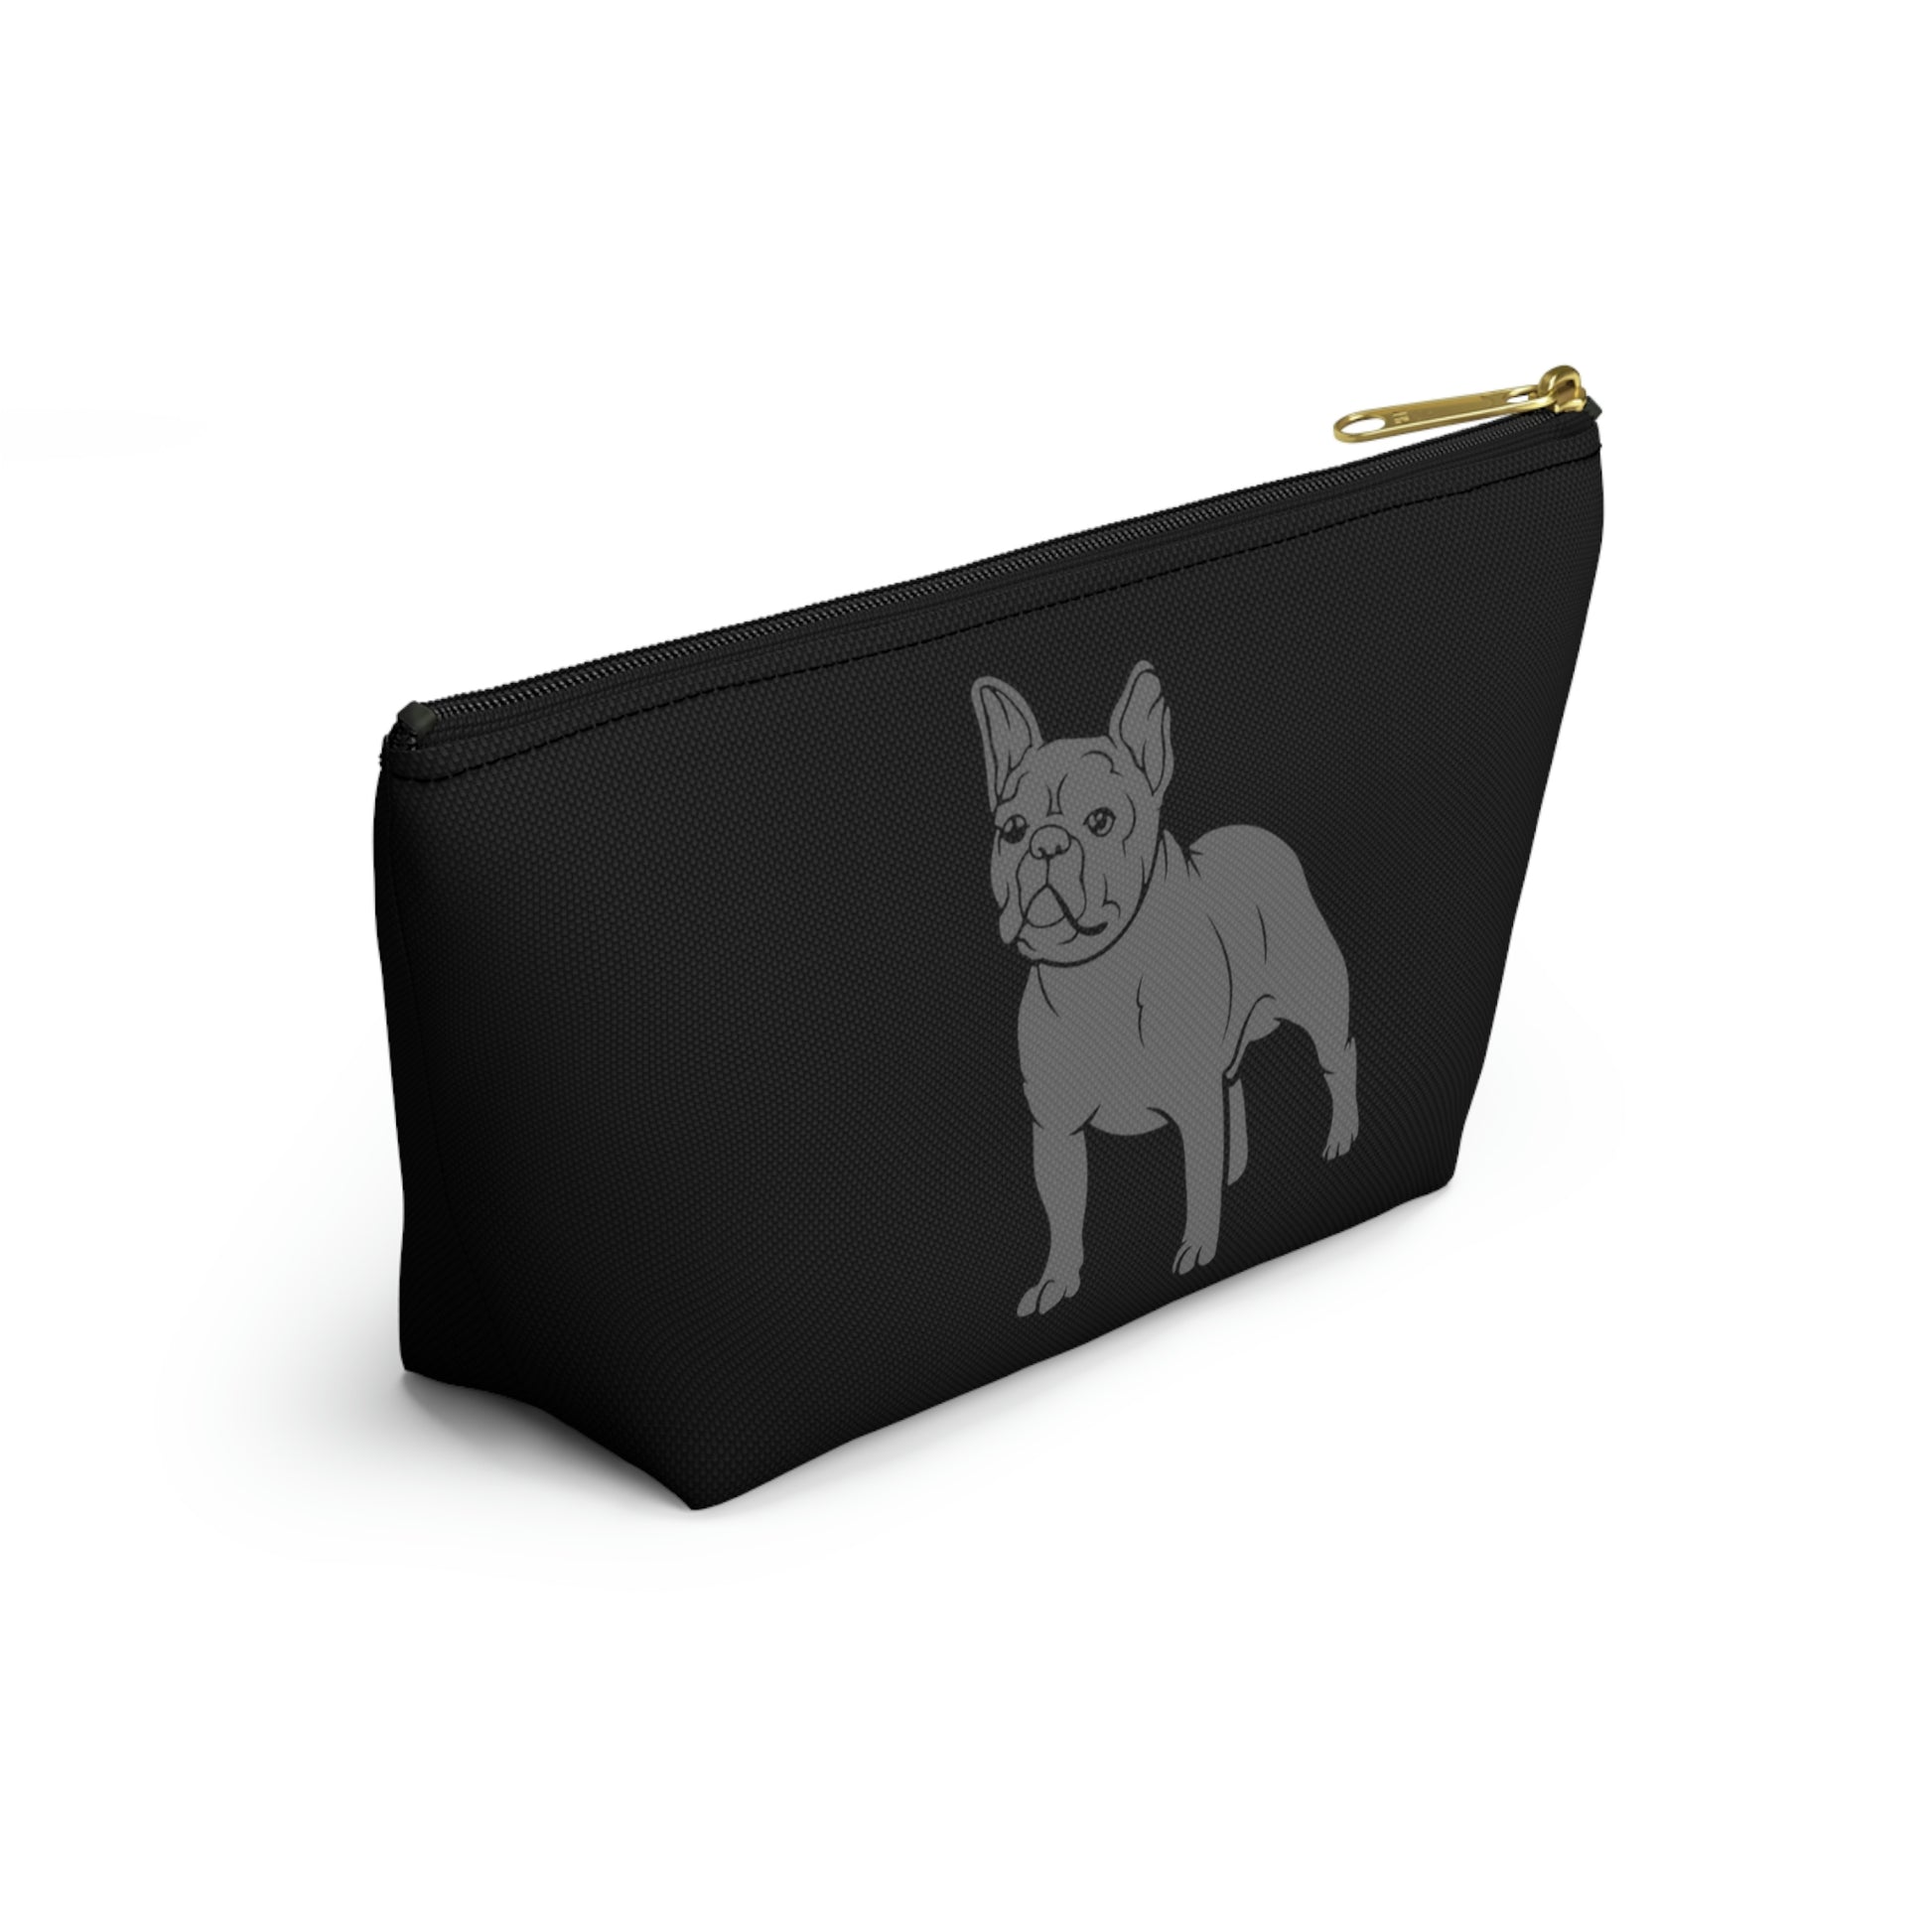 Frenchie Black Accessory Pouch With T-bottom | BKLA | shoes & accessories | backpack, hat, phone cover, tote bags, clutch bags